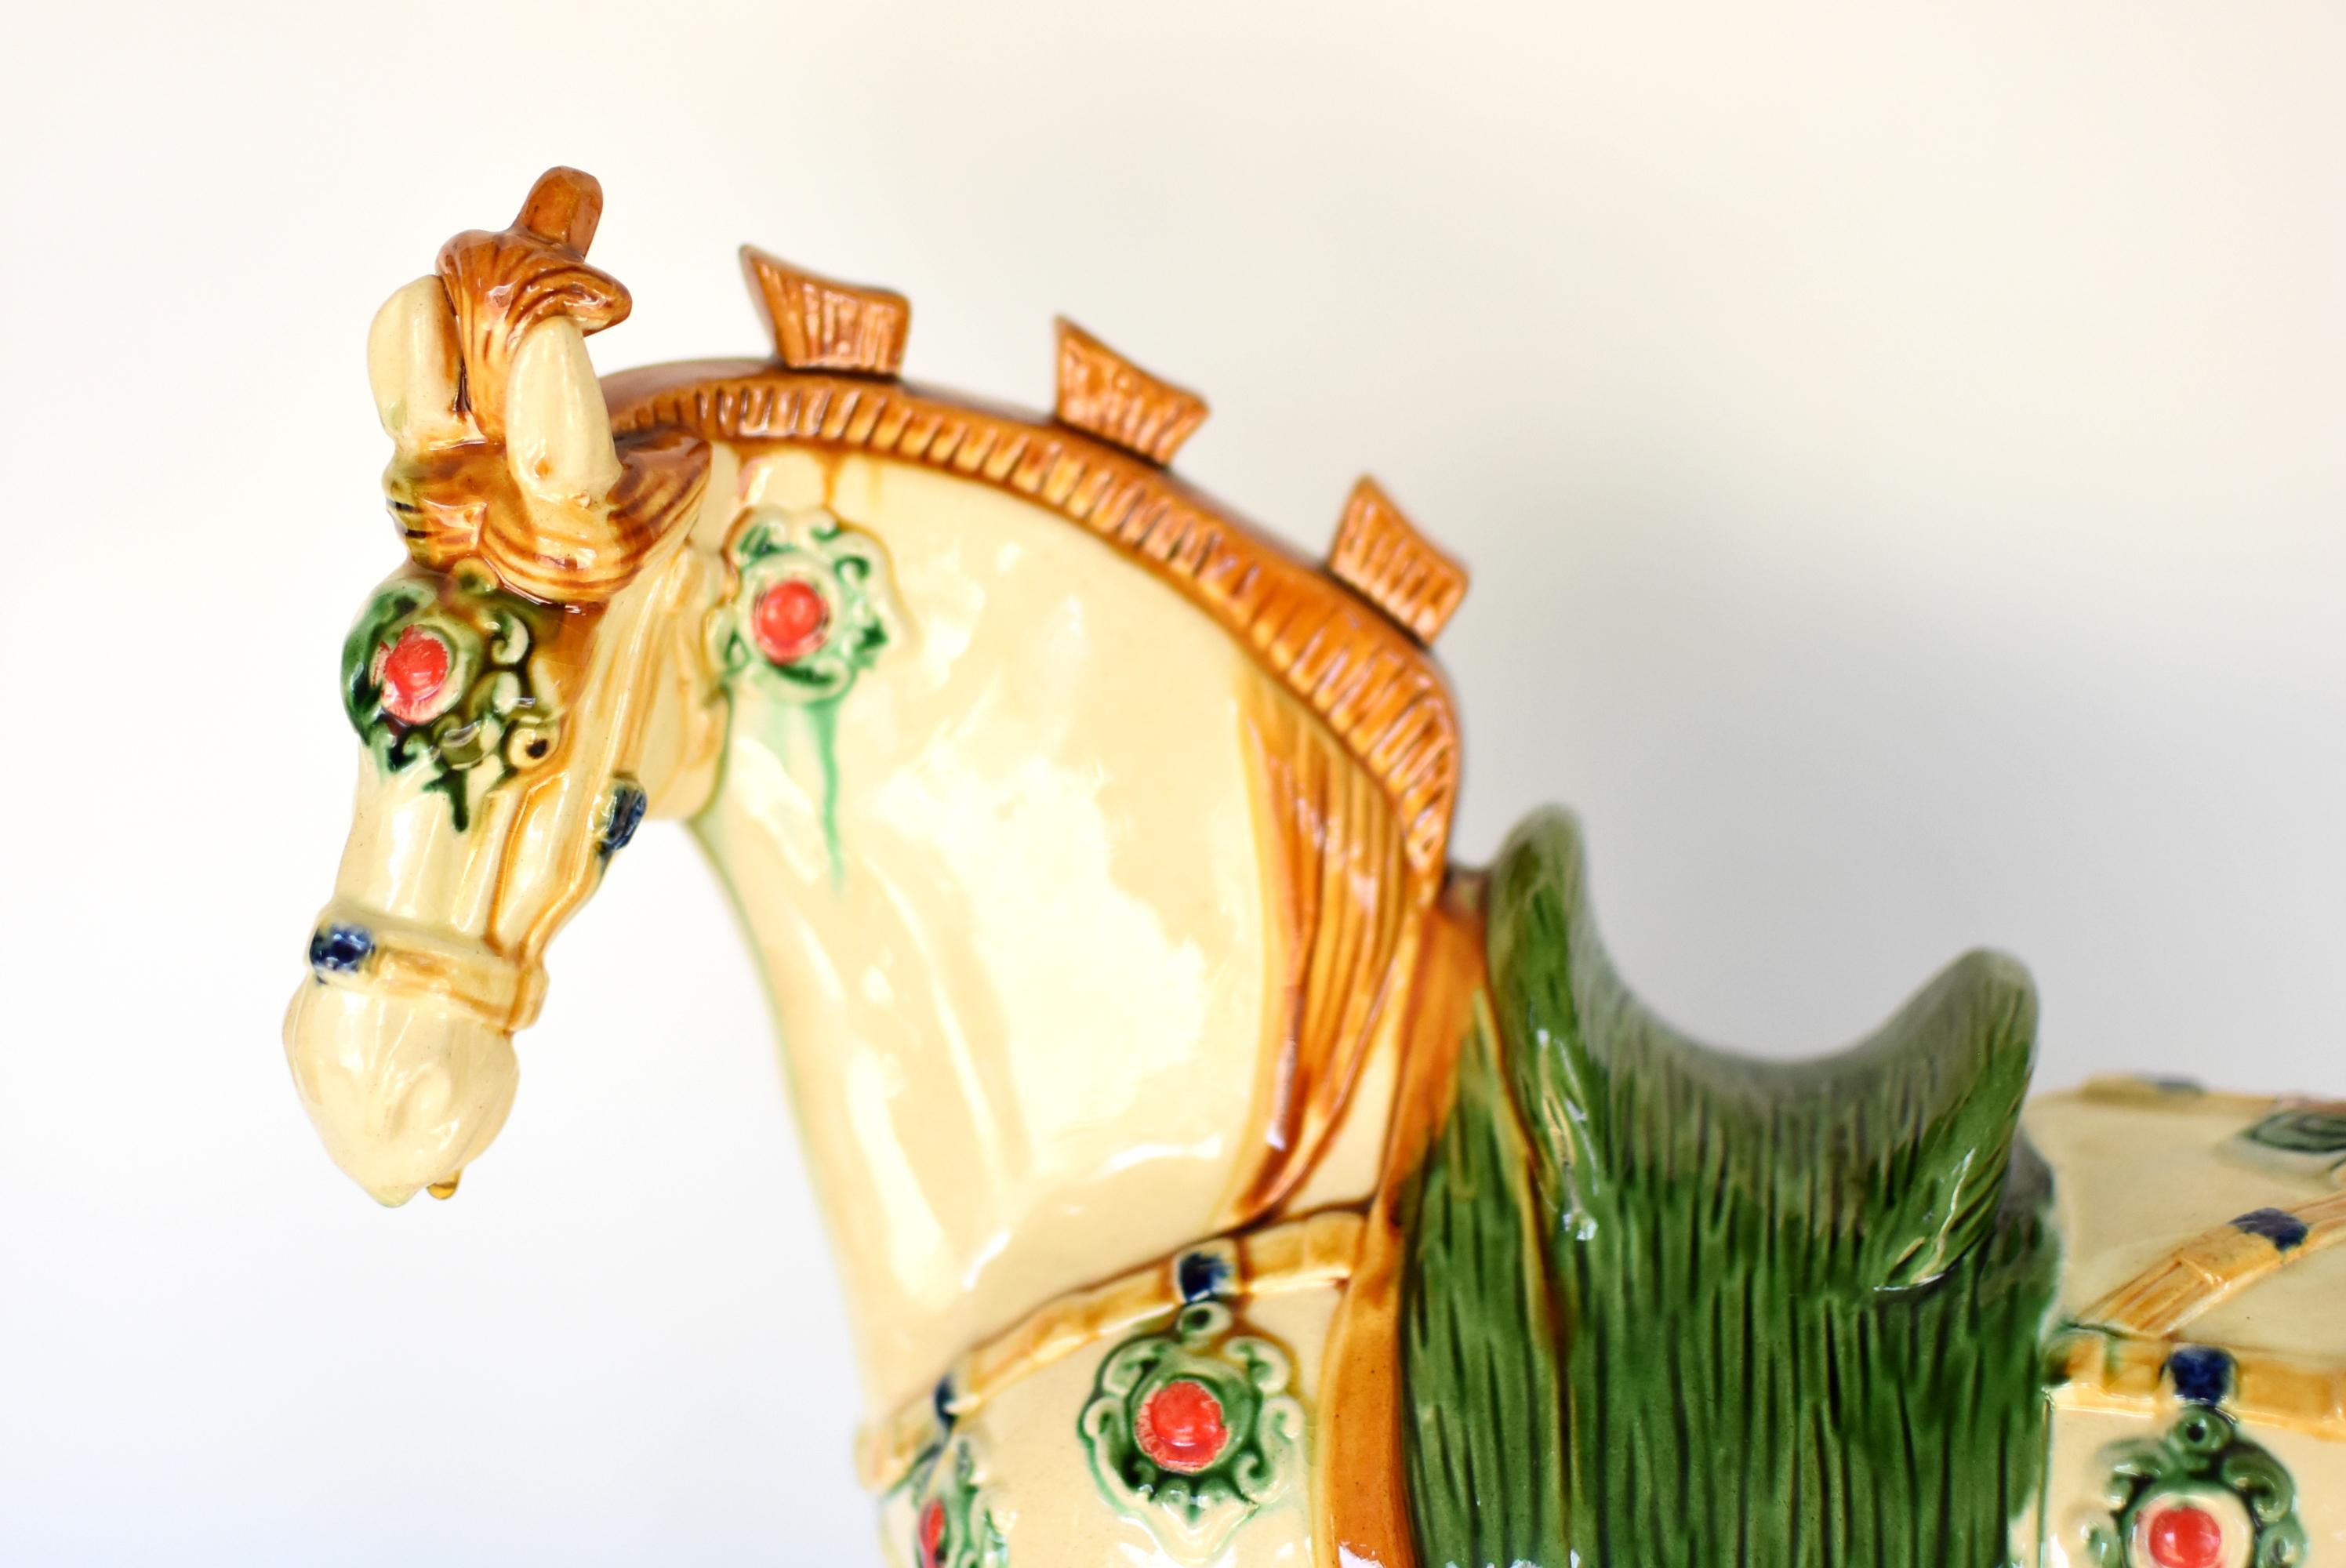 A majestic, large, white butterscotch San Cai horse in high gloss. The Sancai technique dates back to the Tang dynasty (618–907AD). This wonderful piece has all the hallmarks of Tang San Cai terracotta potteries with skillfully applied glaze